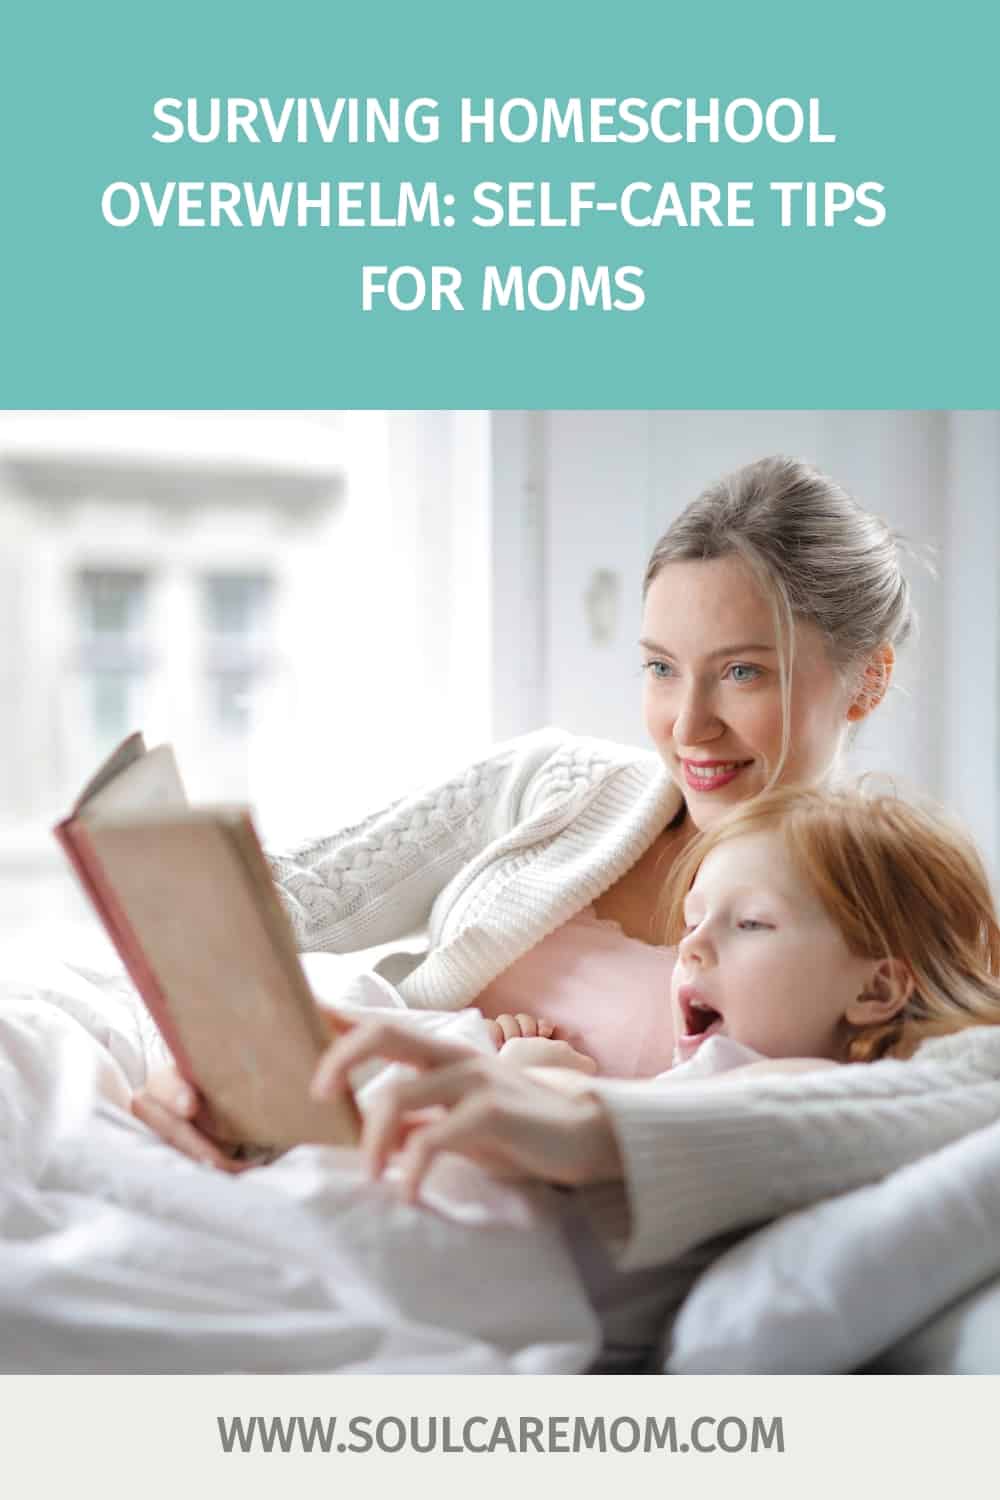 Homeschool Mom and daughter enjoying reading a book together - while mom goes from overwhelm to learning self care tips to have more fun homeschooling 